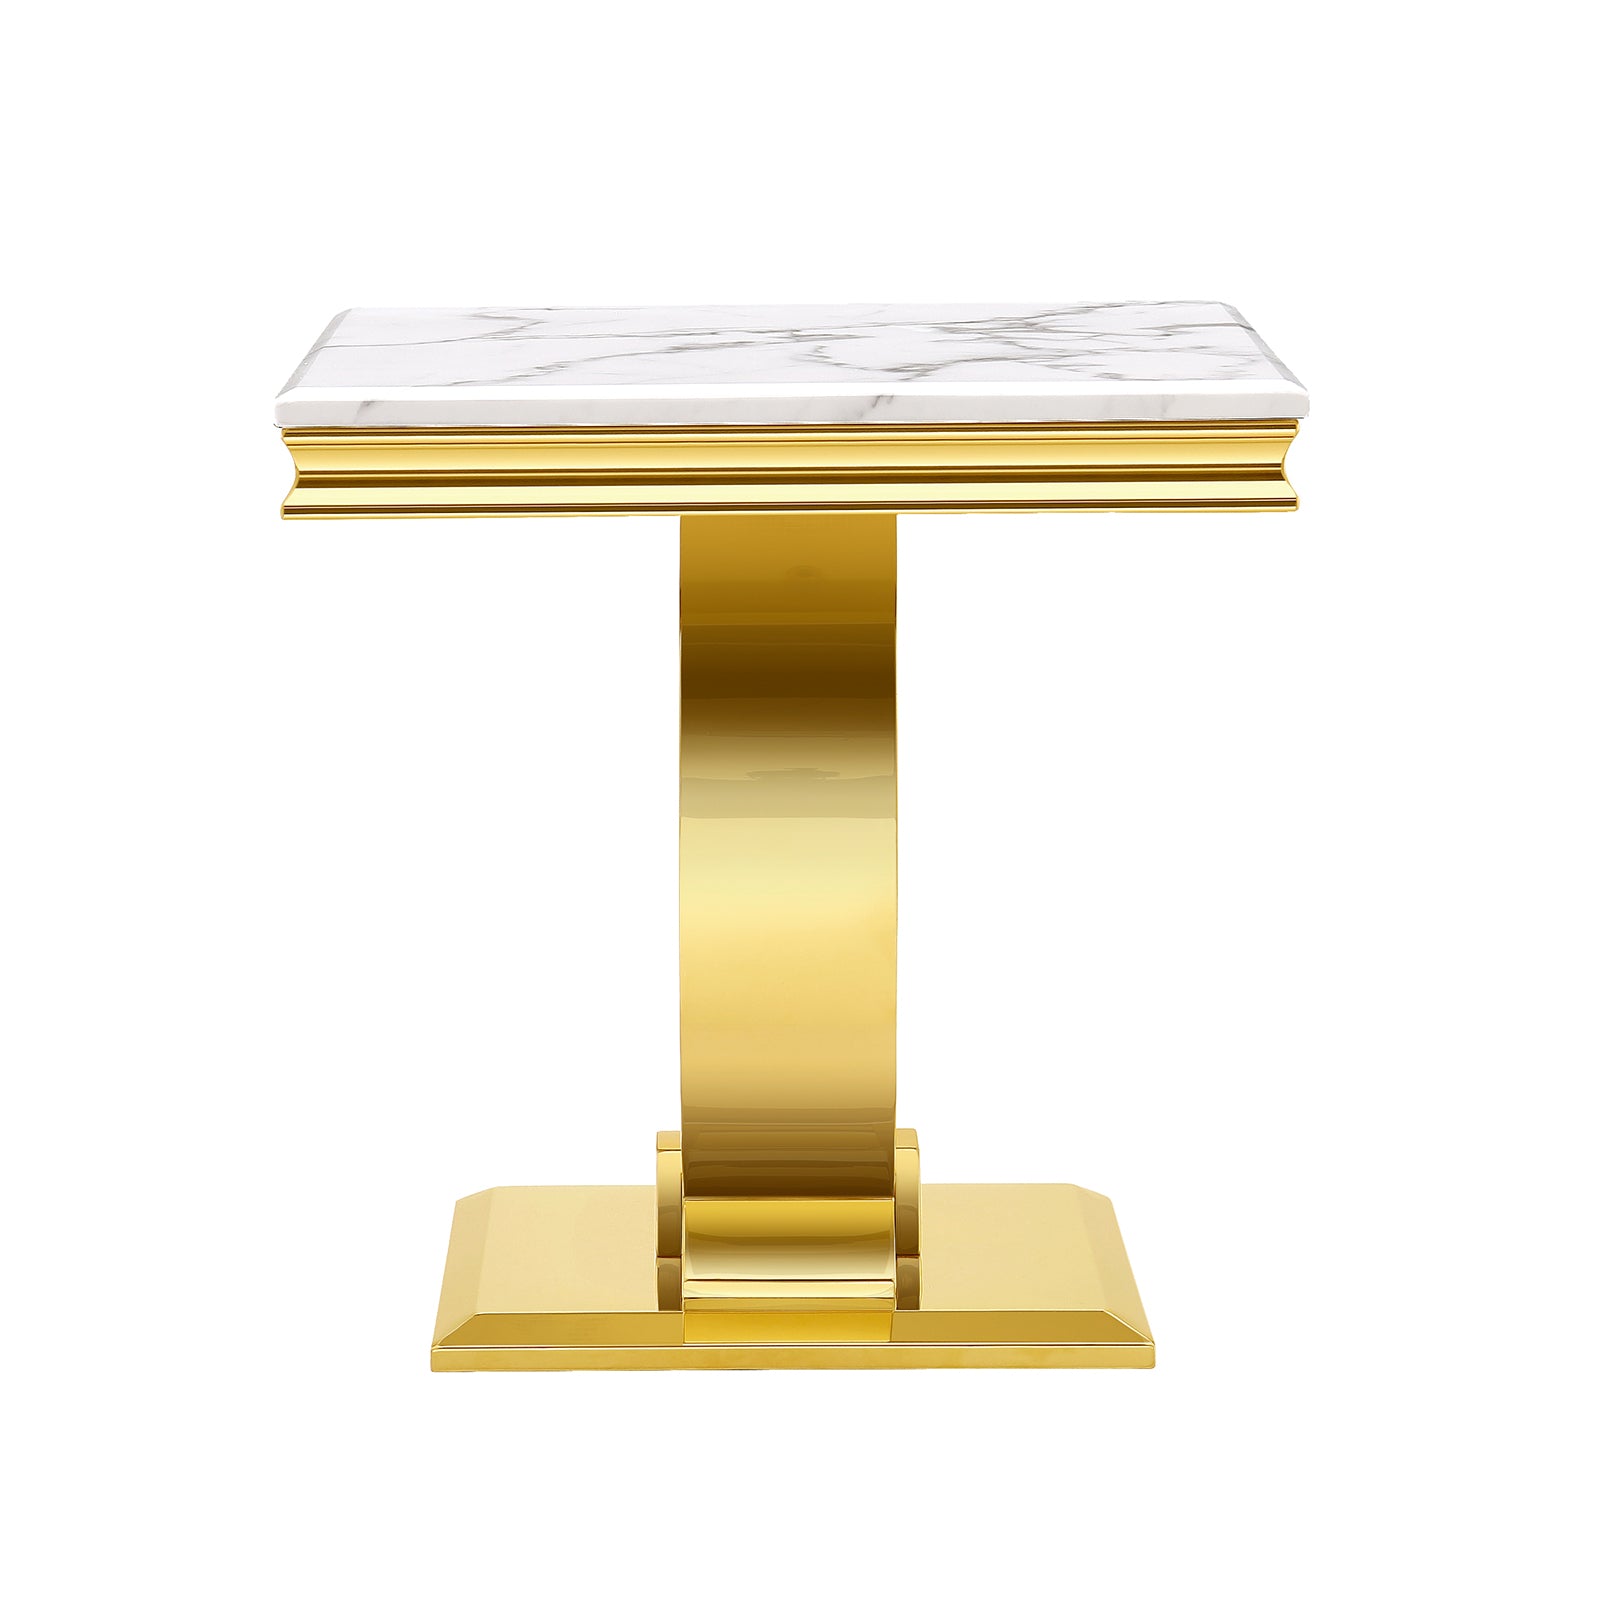 White End Table With Gold Metal U Base| E401